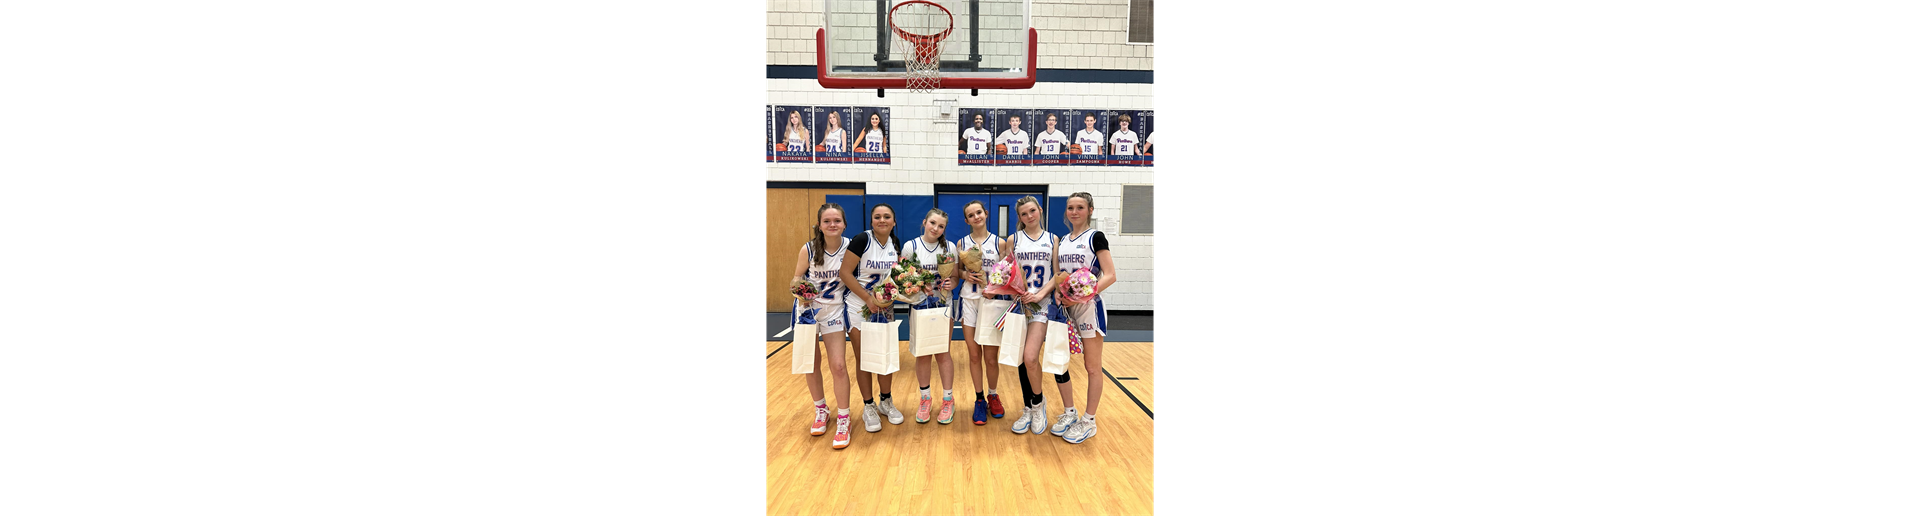 Girls Basketball 8th Grade Recognition